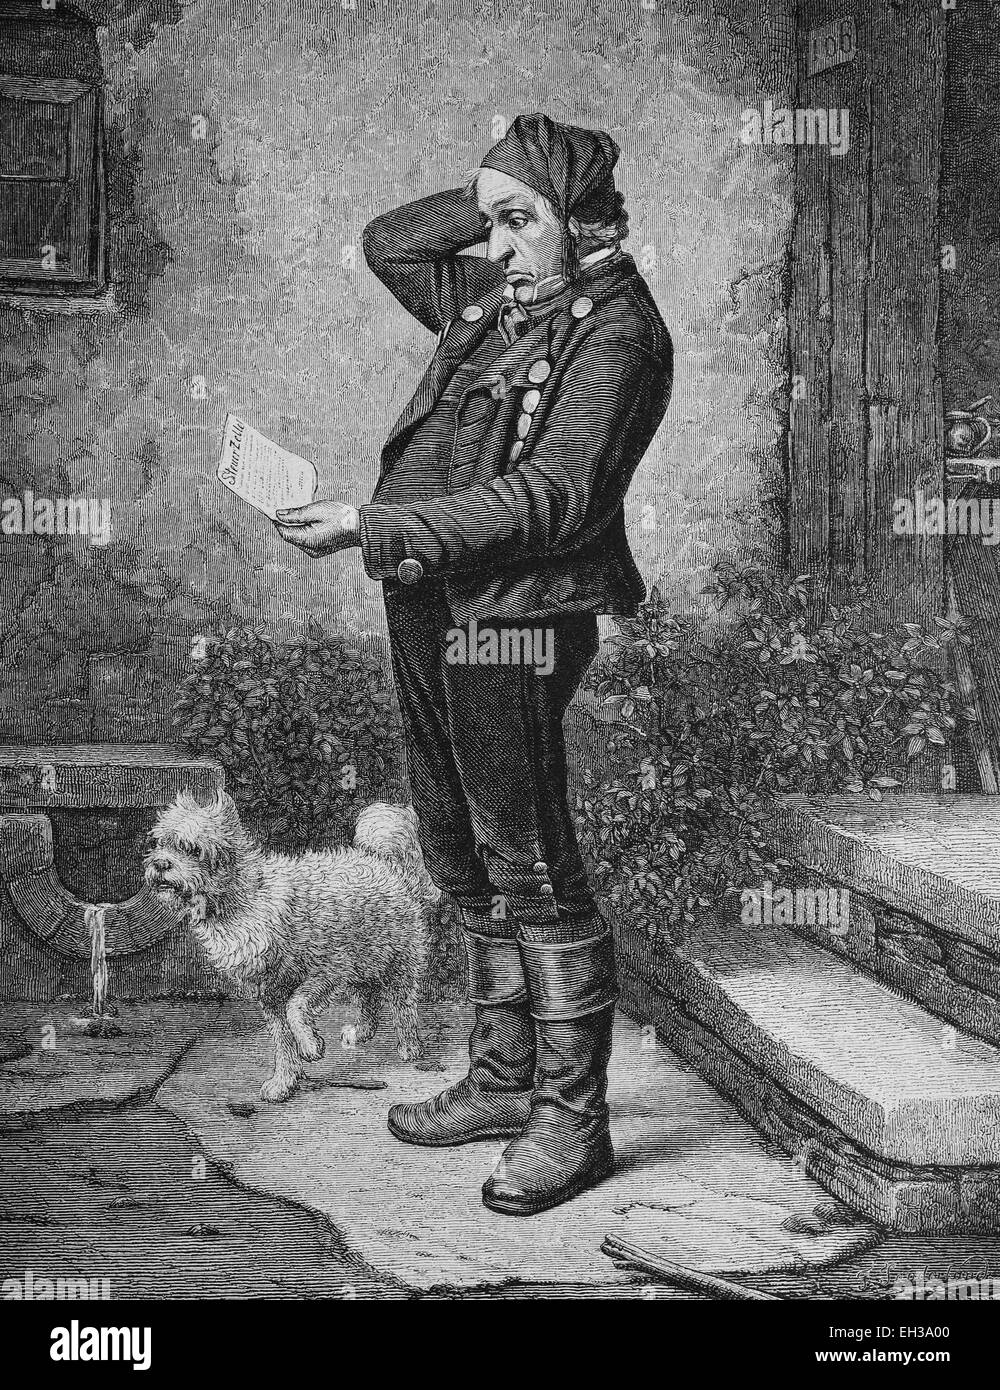 Man with a tax demand, wood engraving, c 1880 Stock Photo